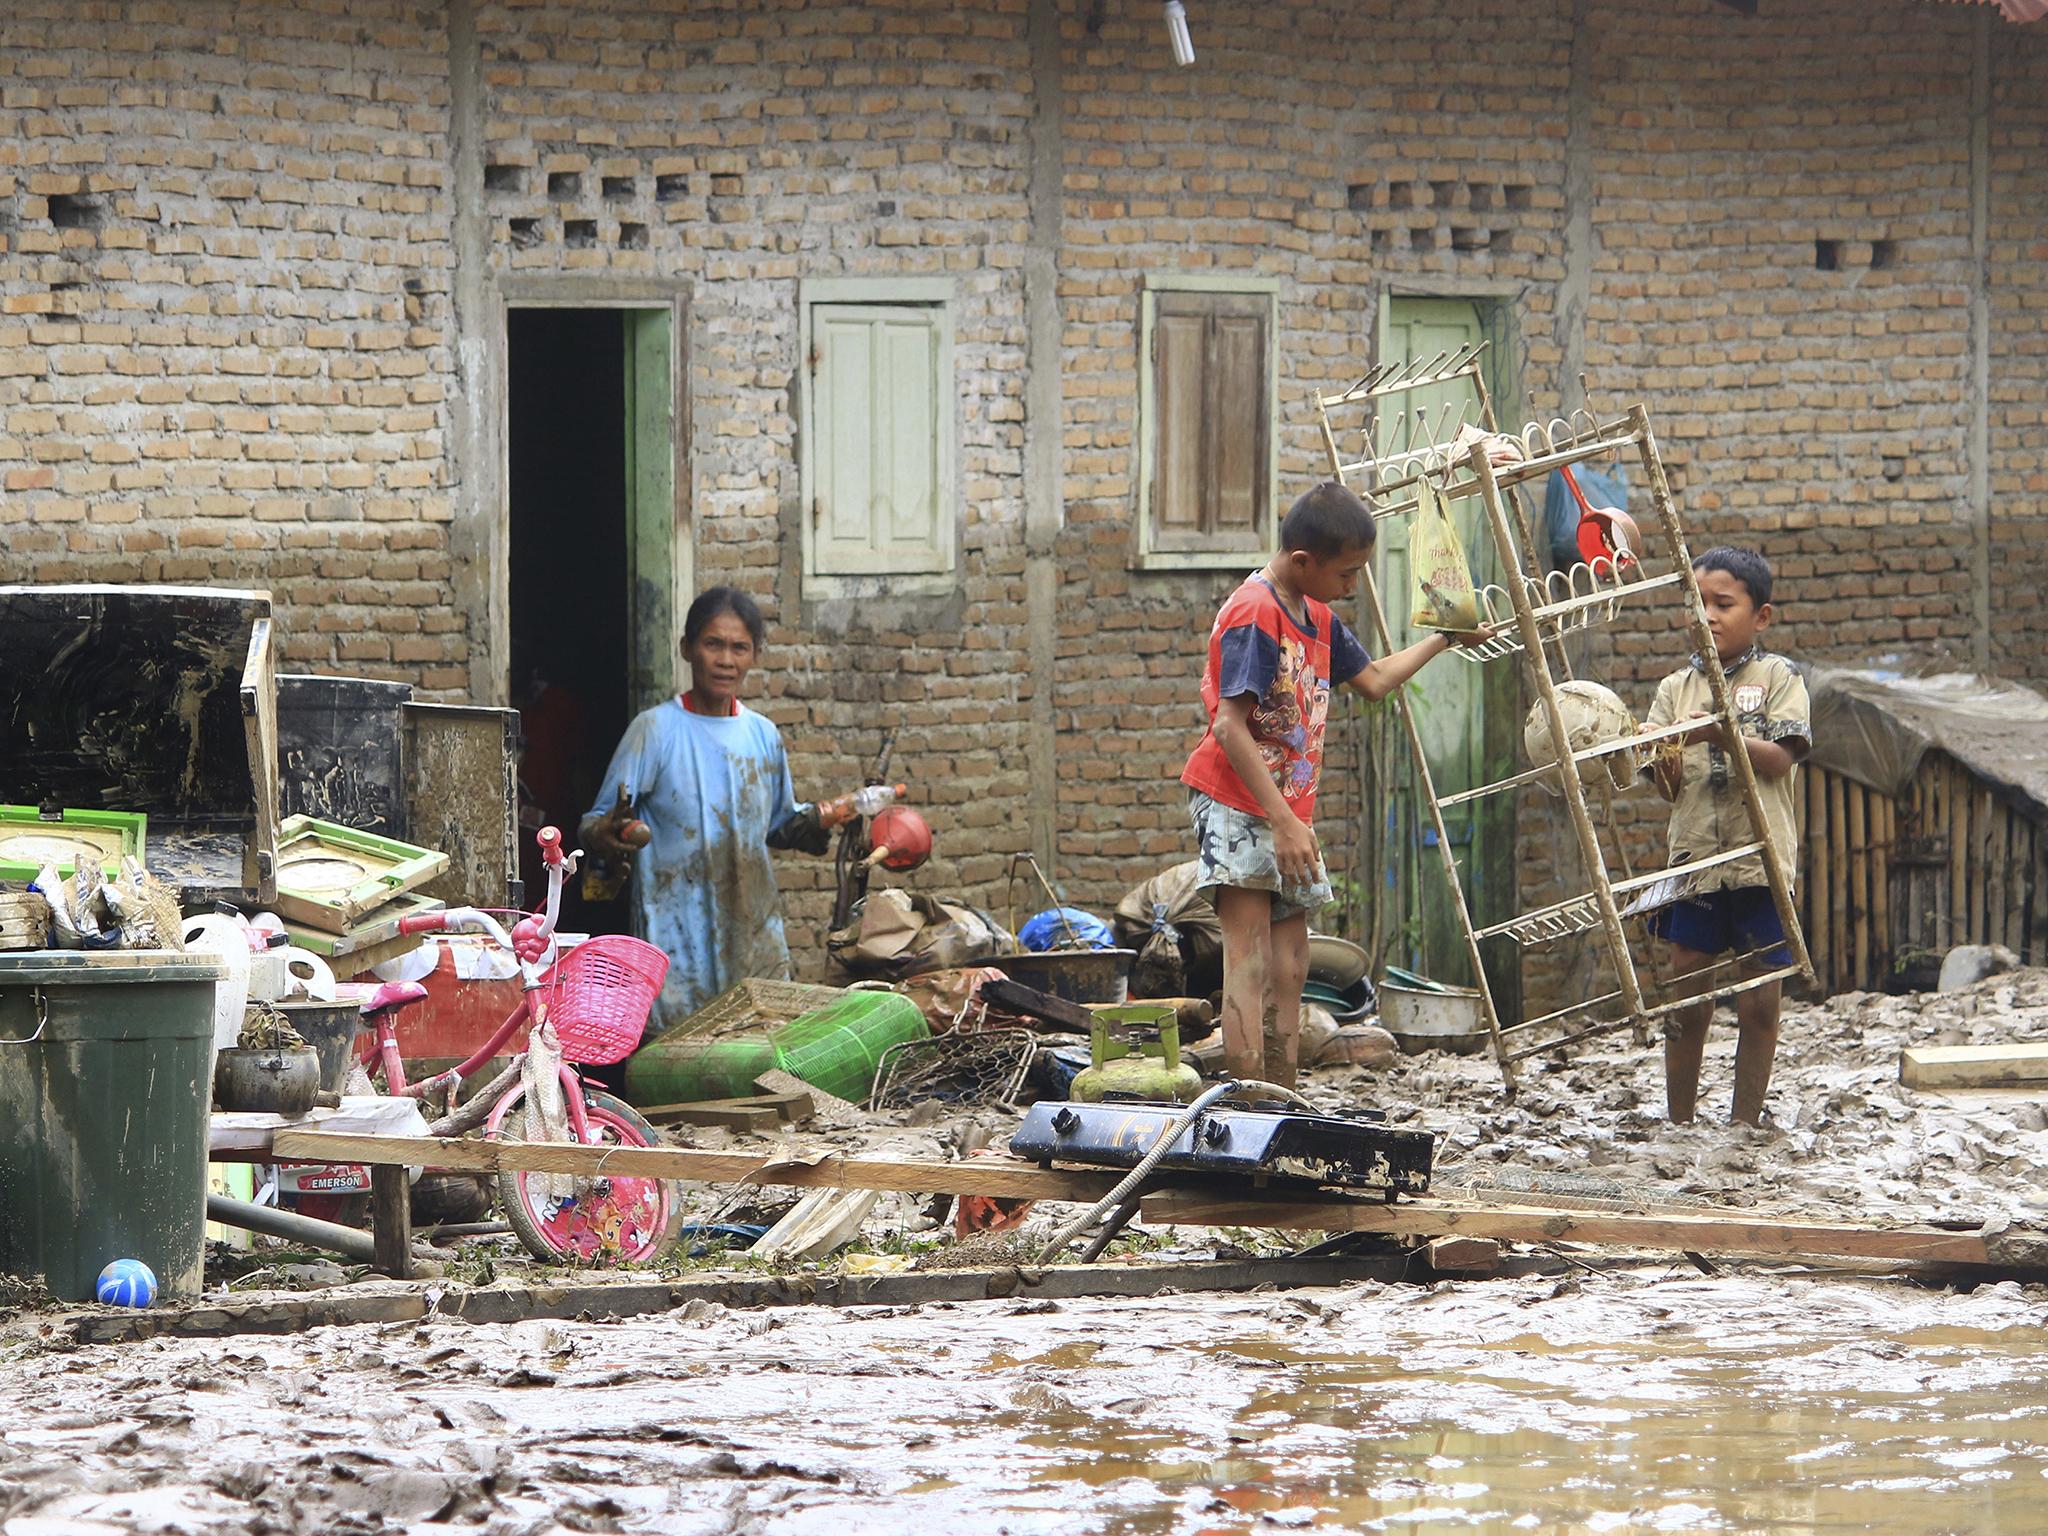 More than 2,000 people in Sumatra have been forced to leave their homes in the flooding